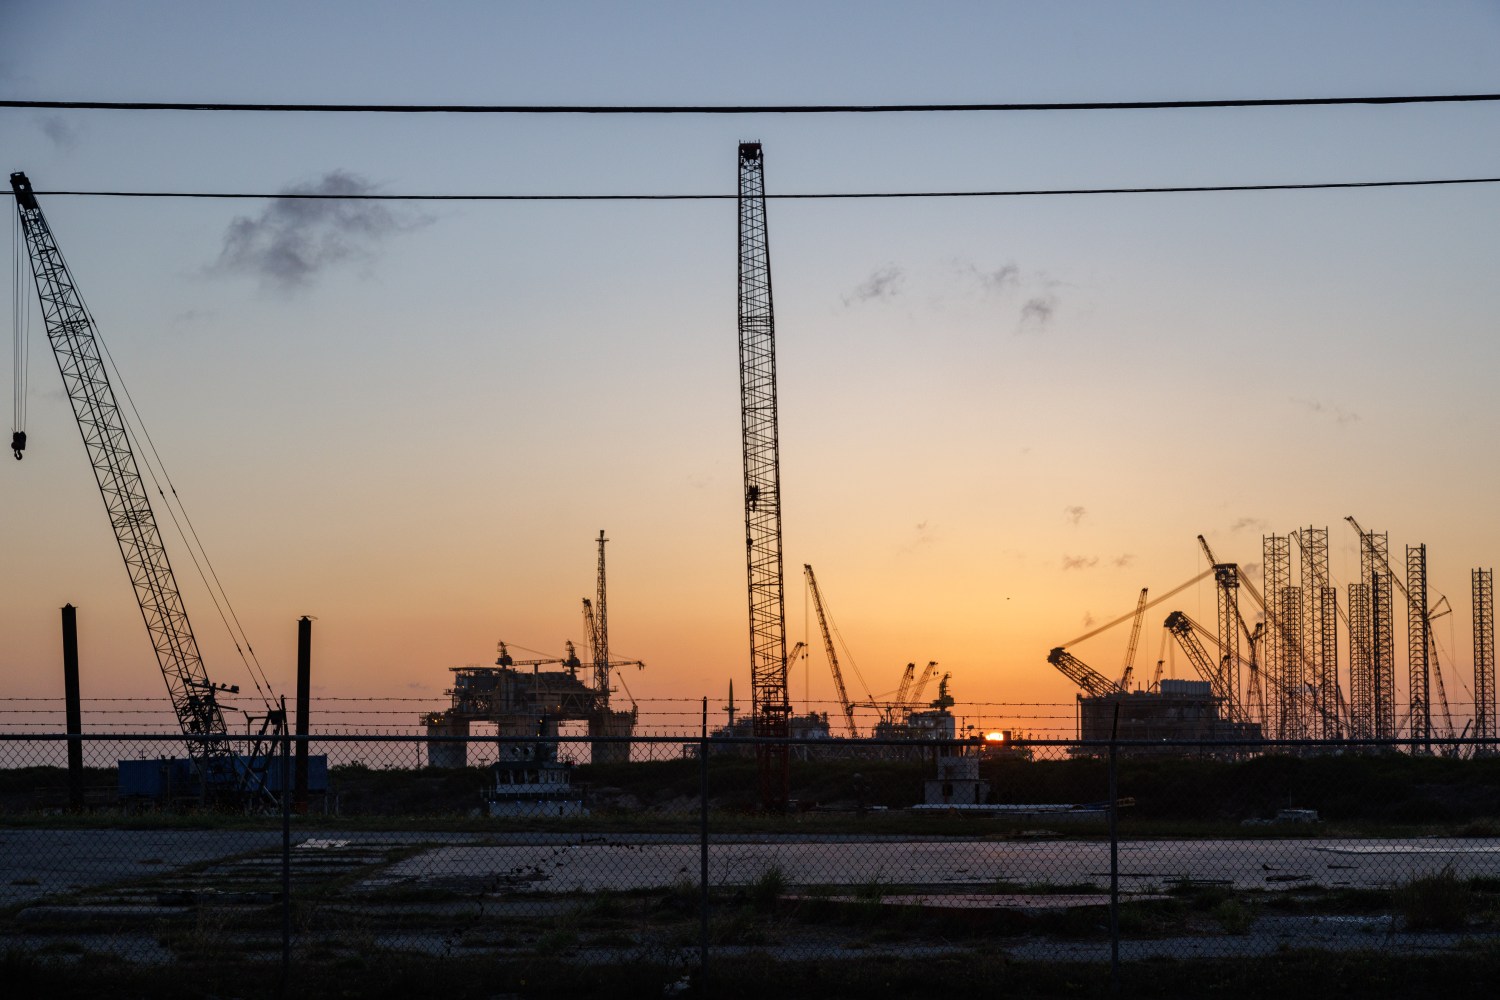 The sun sets beyond machinery at a Kiewit Offshore Services construction site in Ingleside, Texas on July 18, 2022. Kiewit is manufacturing an offshore oil drilling platform called 'Vito' for the Shell company, which, upon completion, will be installed in the Gulf of Mexico to extract petroleum for gasoline resources. (Photo by Bryan Olin Dozier/NurPhoto)NO USE FRANCE